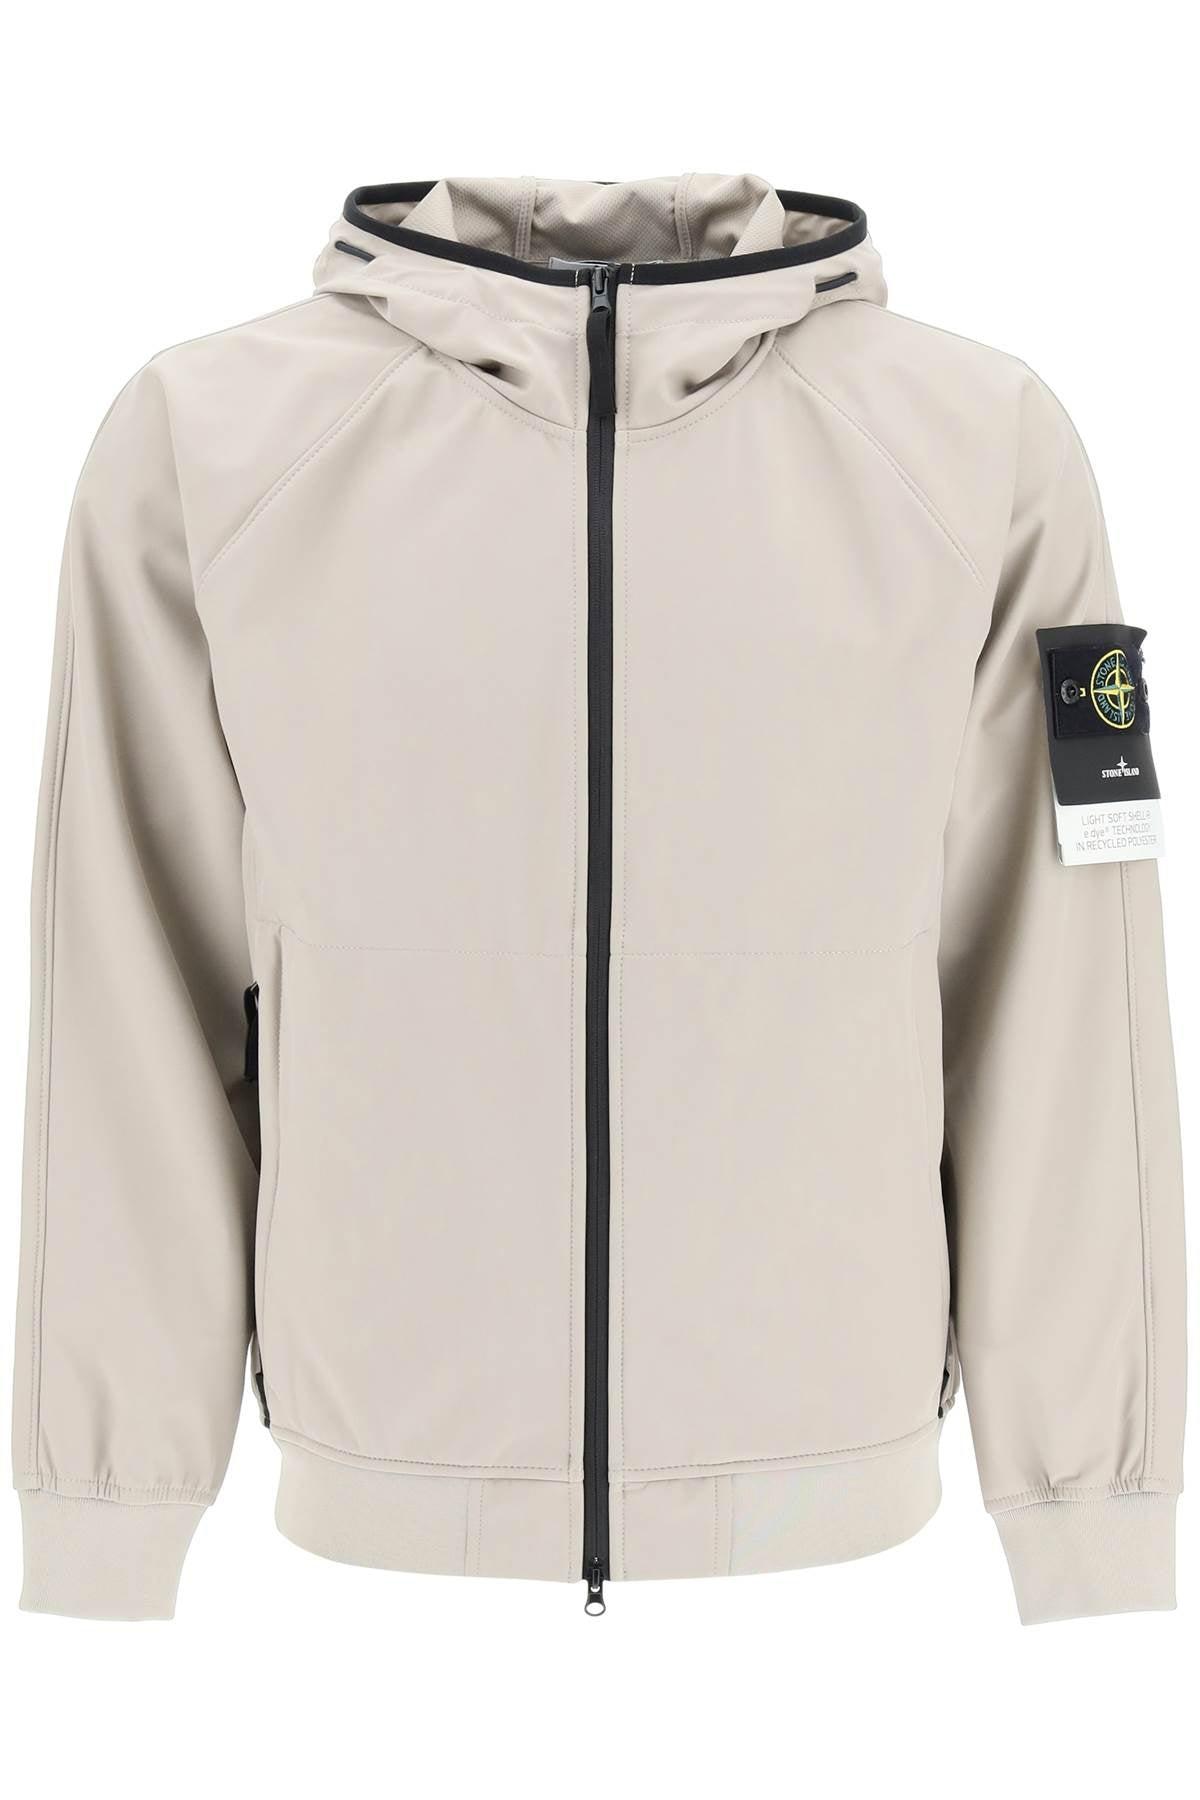 Stone Island Light Soft Shell-r Jacket With E.dye Technology in 